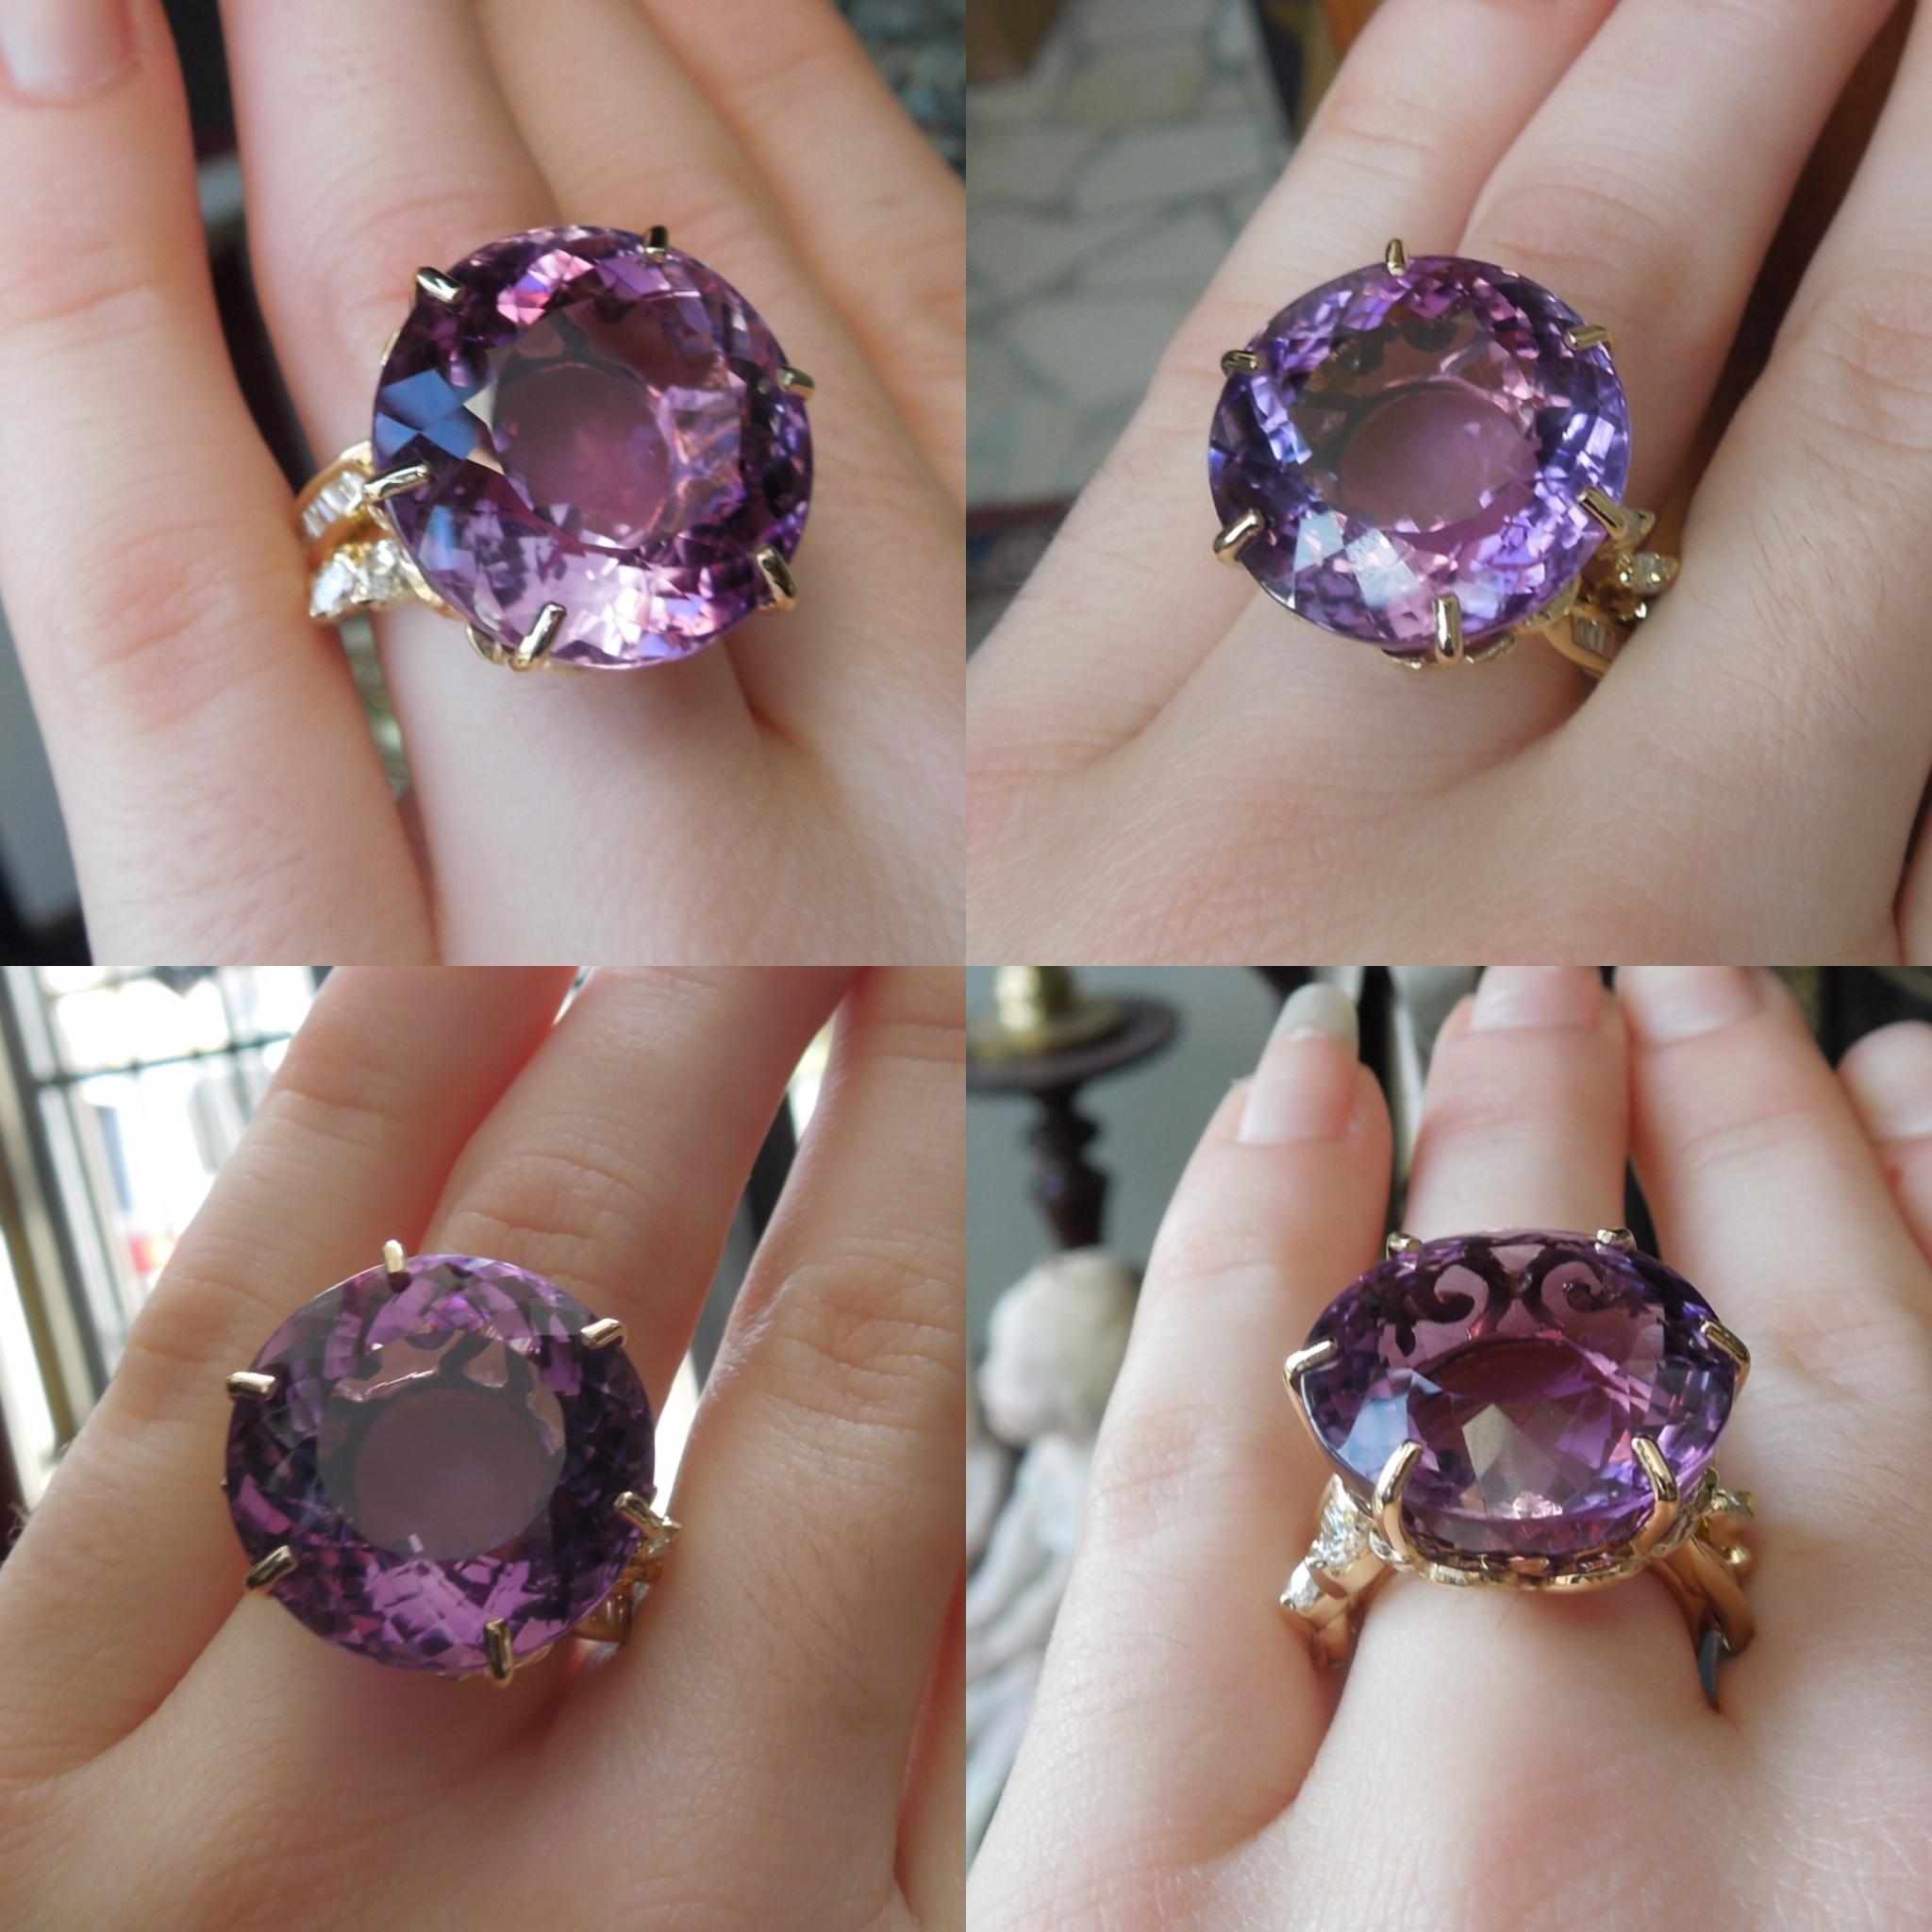 Constructed completely of 14 Karat Yellow Gold, featuring a focal 35 carat Natural Intense Purple Amethyst, at 21mm in diameter, securely set in a 6-Prong mounting. Displaying every characteristic of a fine Brazilian Amethyst as well as in an older